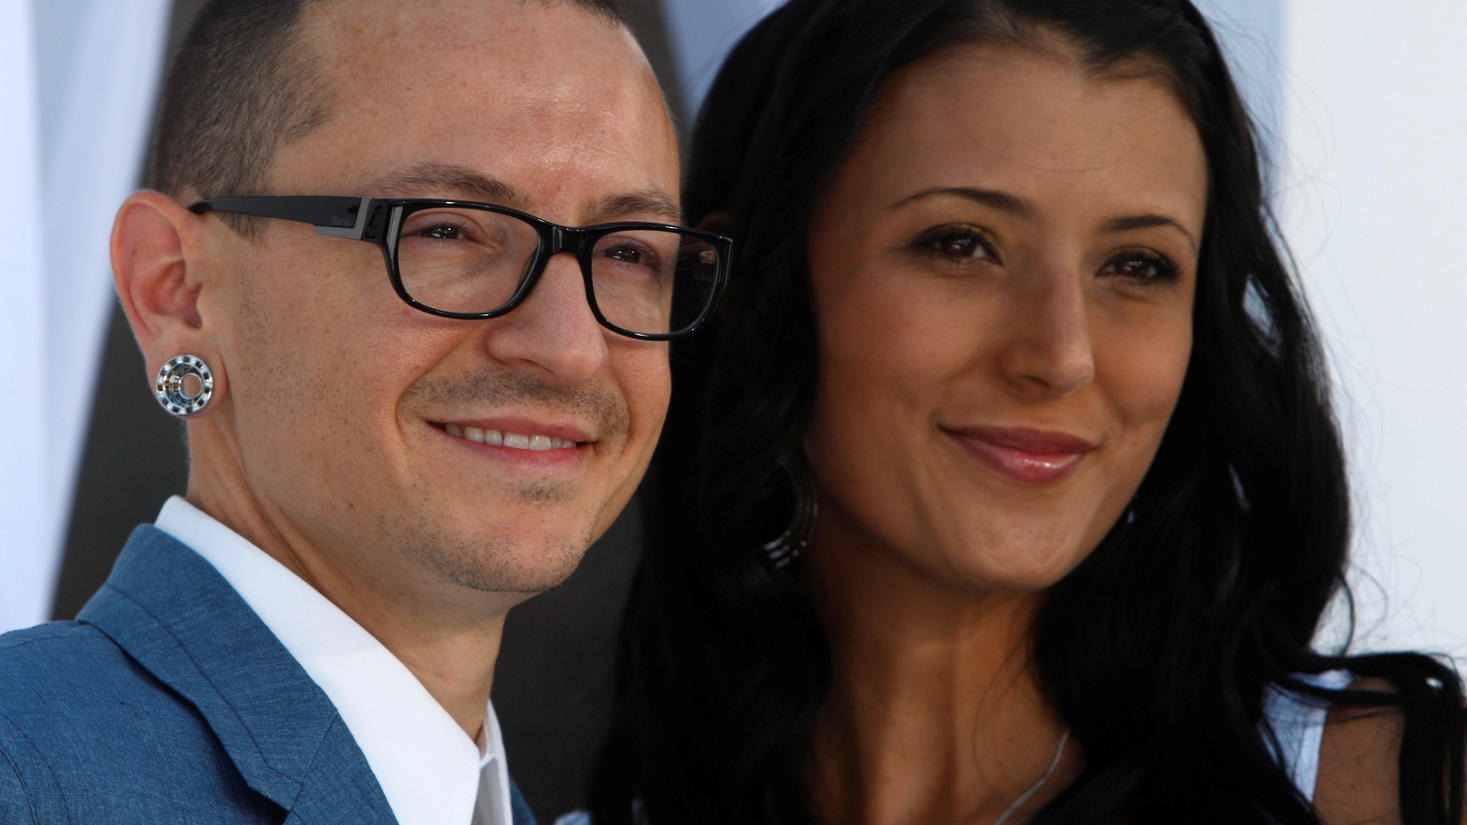 FILE PHOTO: Chester Bennington of Linkin Park and wife Talinda arrive at the 2012 Billboard Music Awards in Las Vegas, Nevada, May 20, 2012. REUTERS/Steve Marcus/File Photo